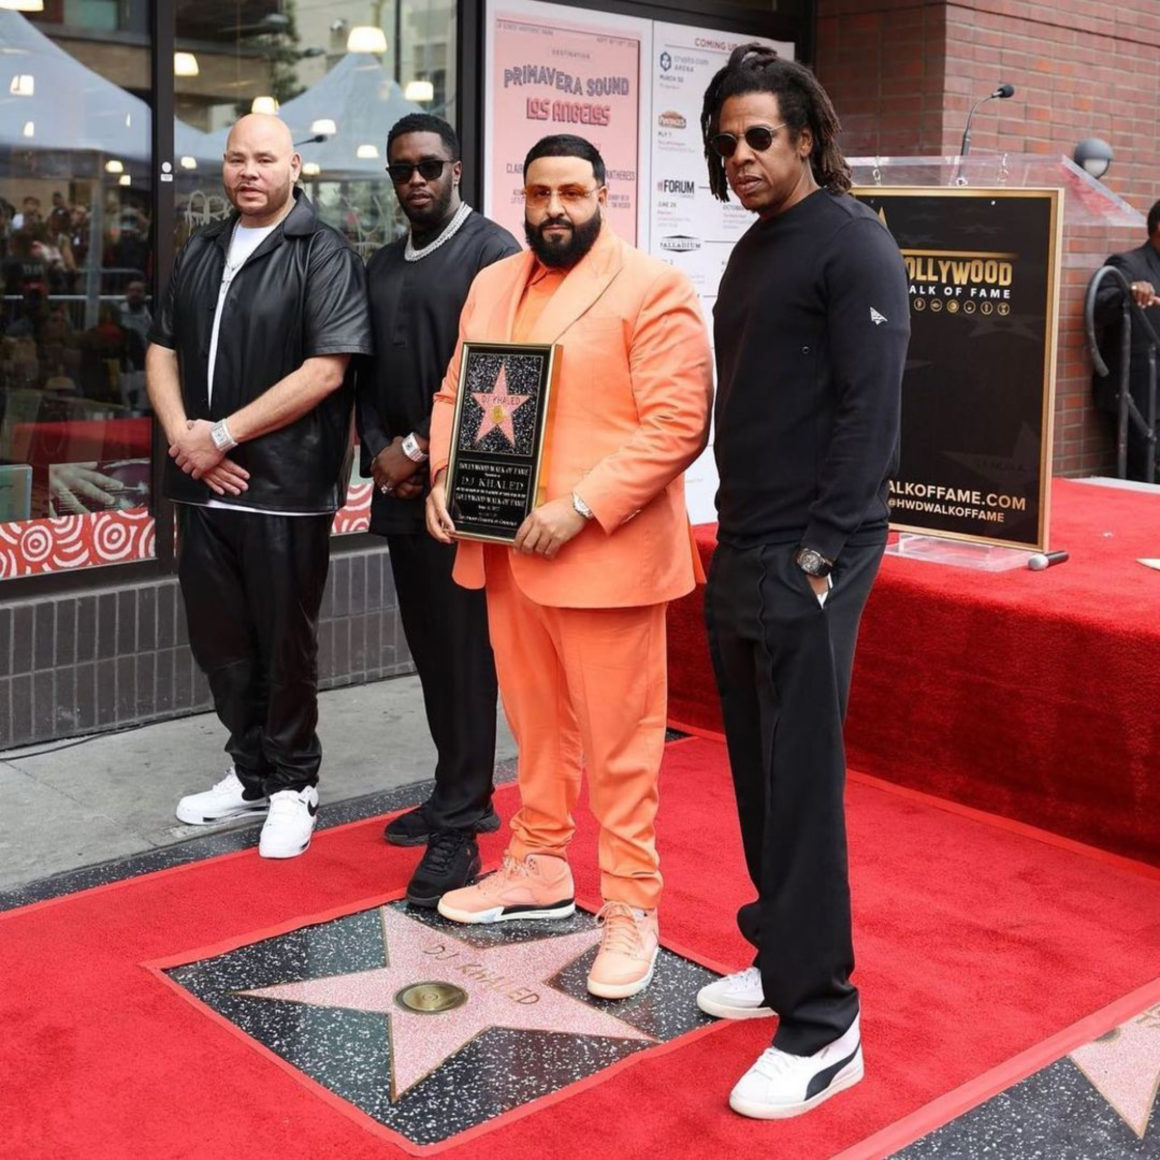 DJ Khaled Receives His Star on the Hollywood Walk of Fame In  Dolce & Gabbana Suit, Patek Philippe Watch, and Orange We the Best x Jordan Sneakers